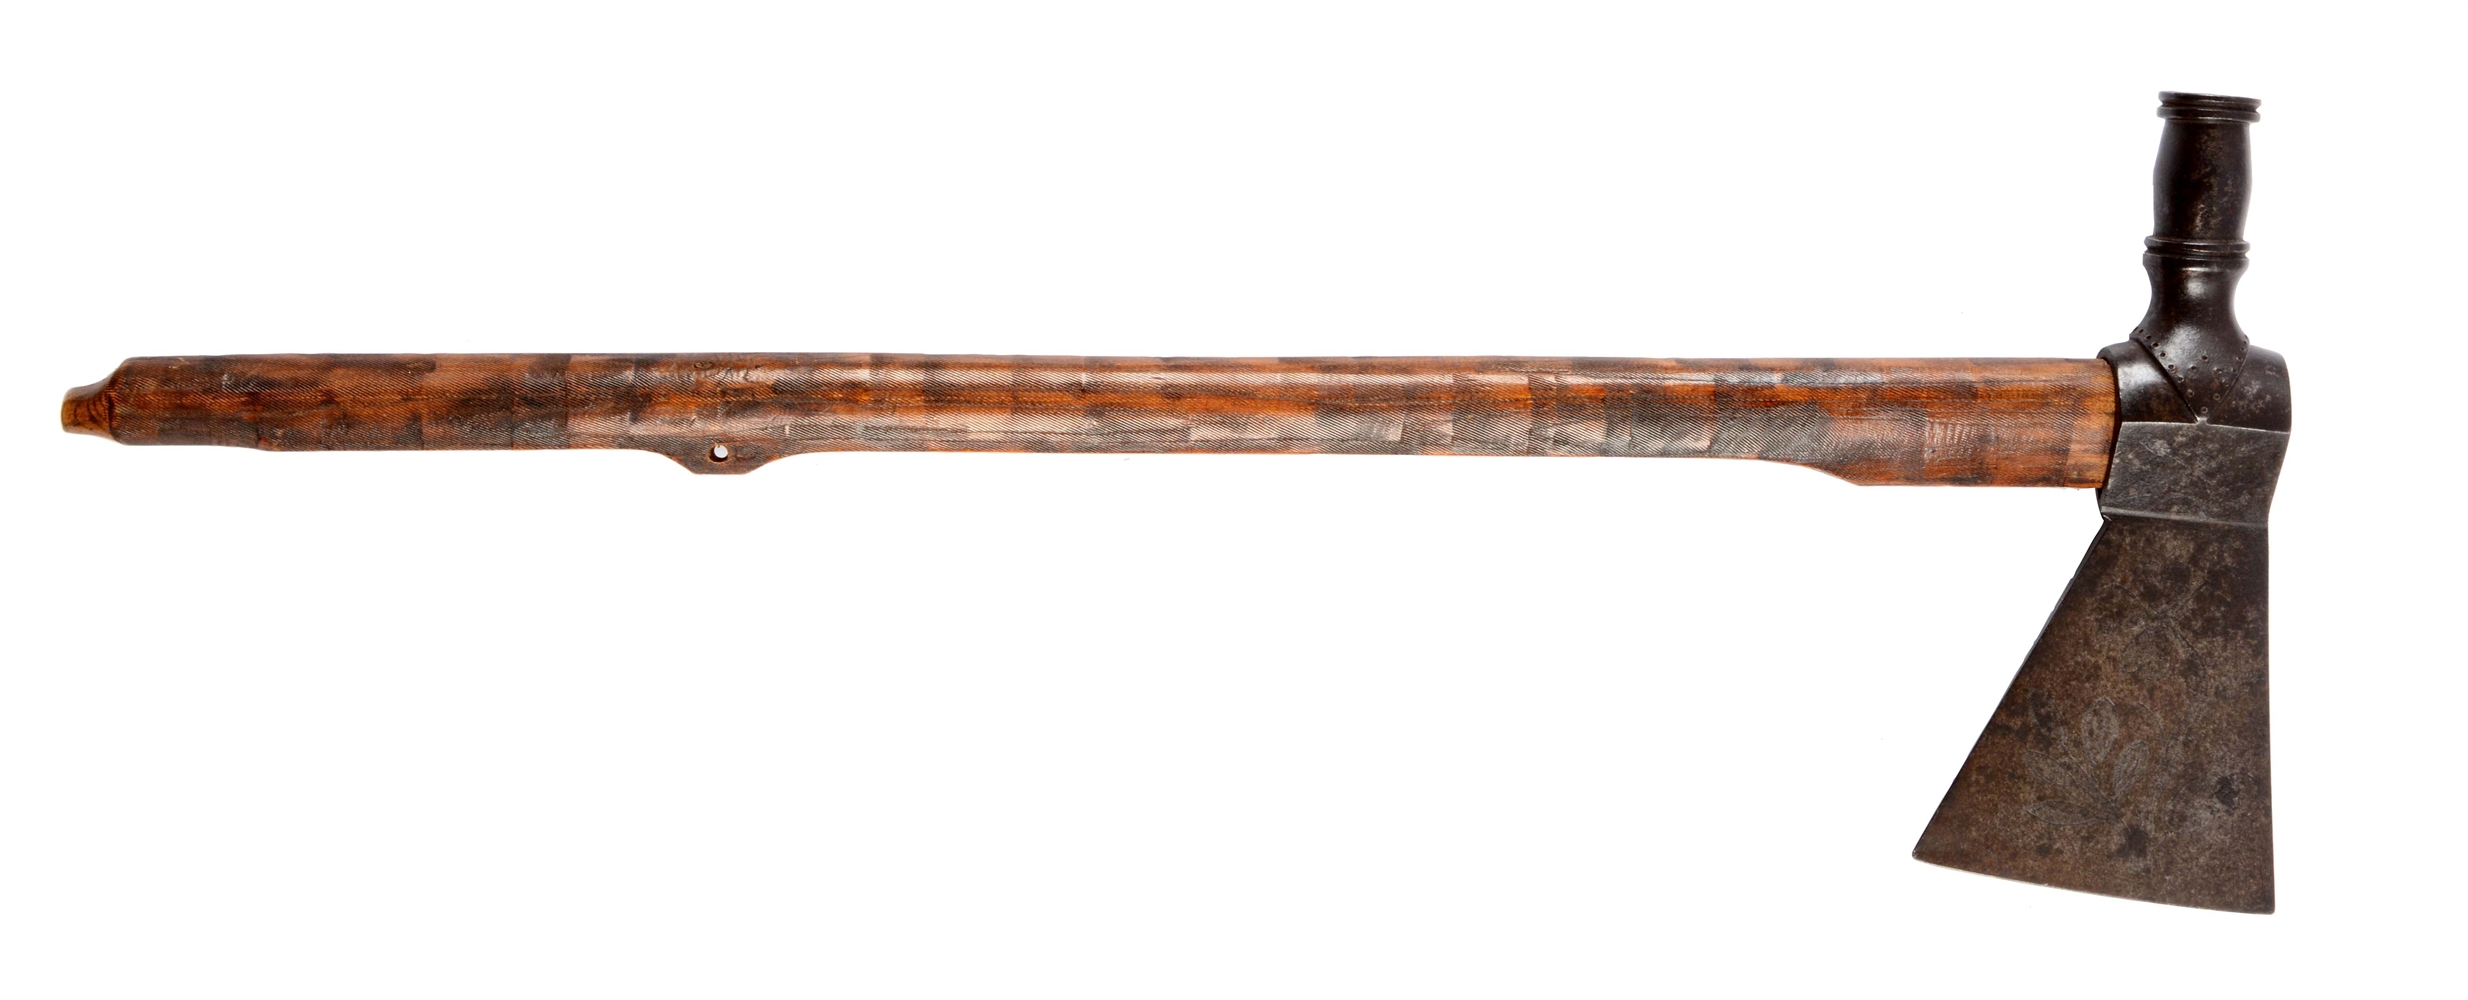 NORTHERN PLAINS PIPE TOMAHAWK.